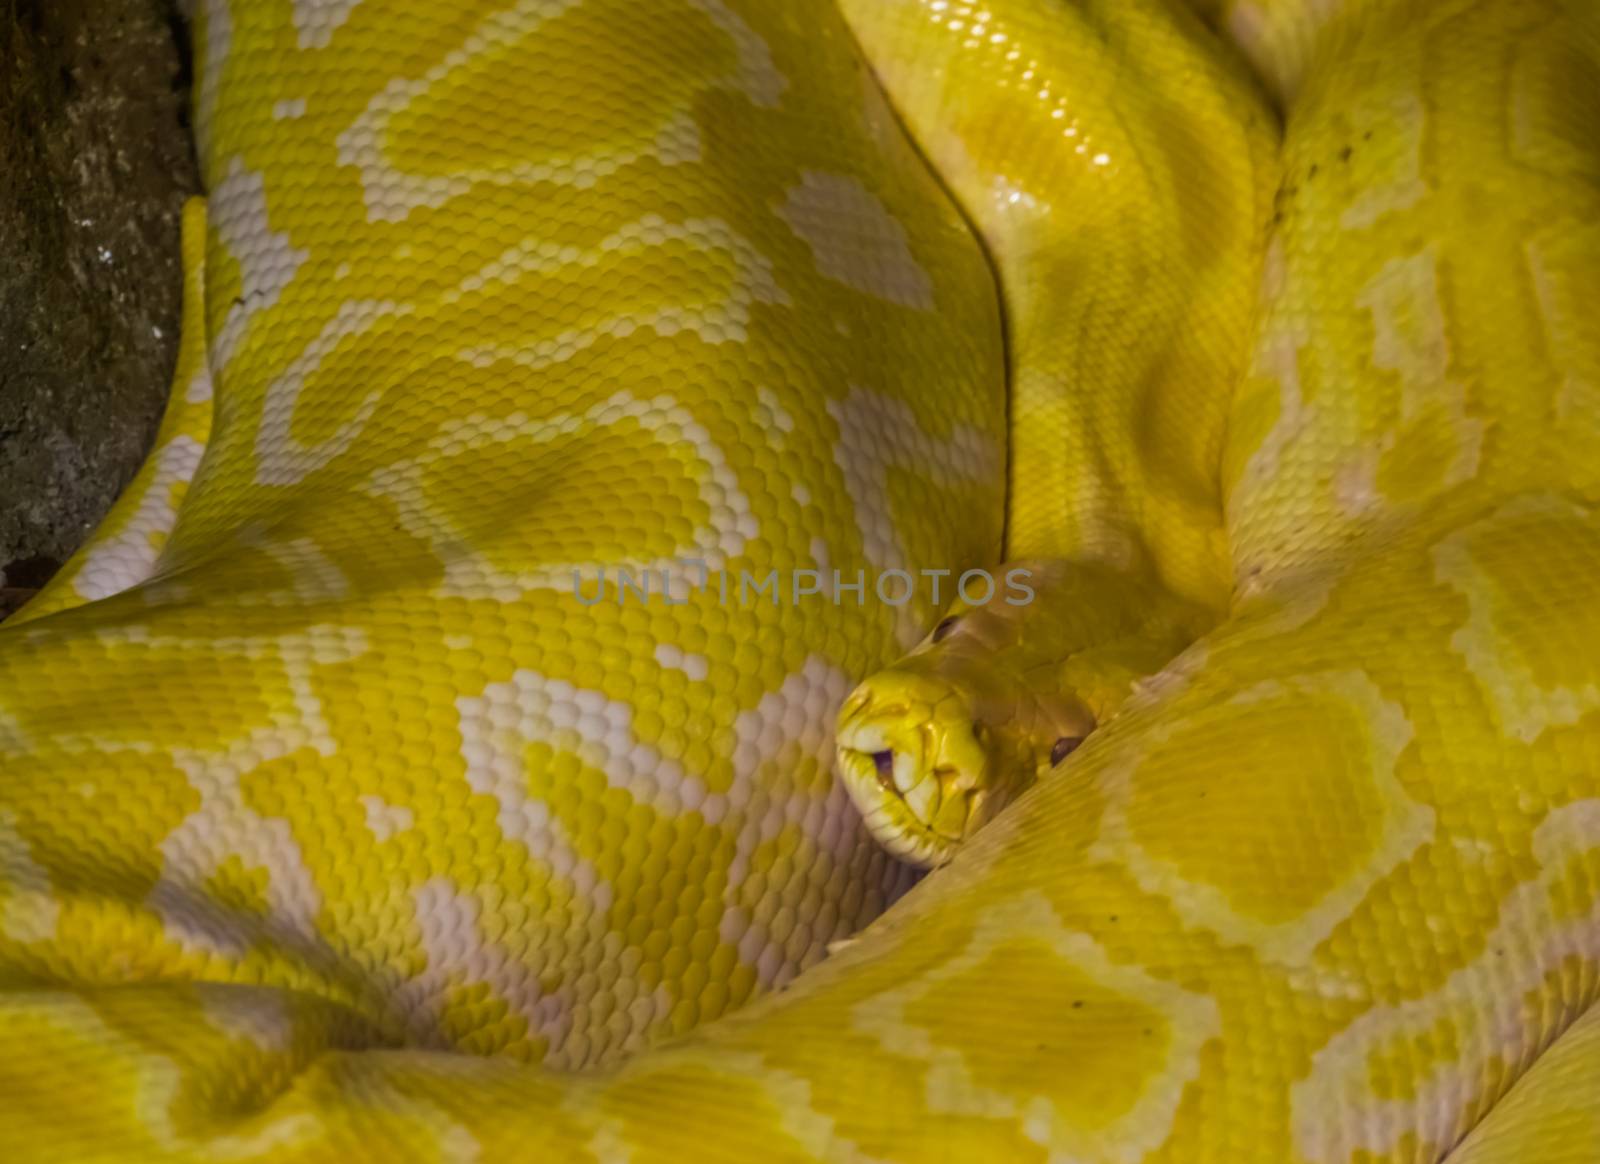 yellow and white Asian rock python in closeup, popular tropical reptile specie from India